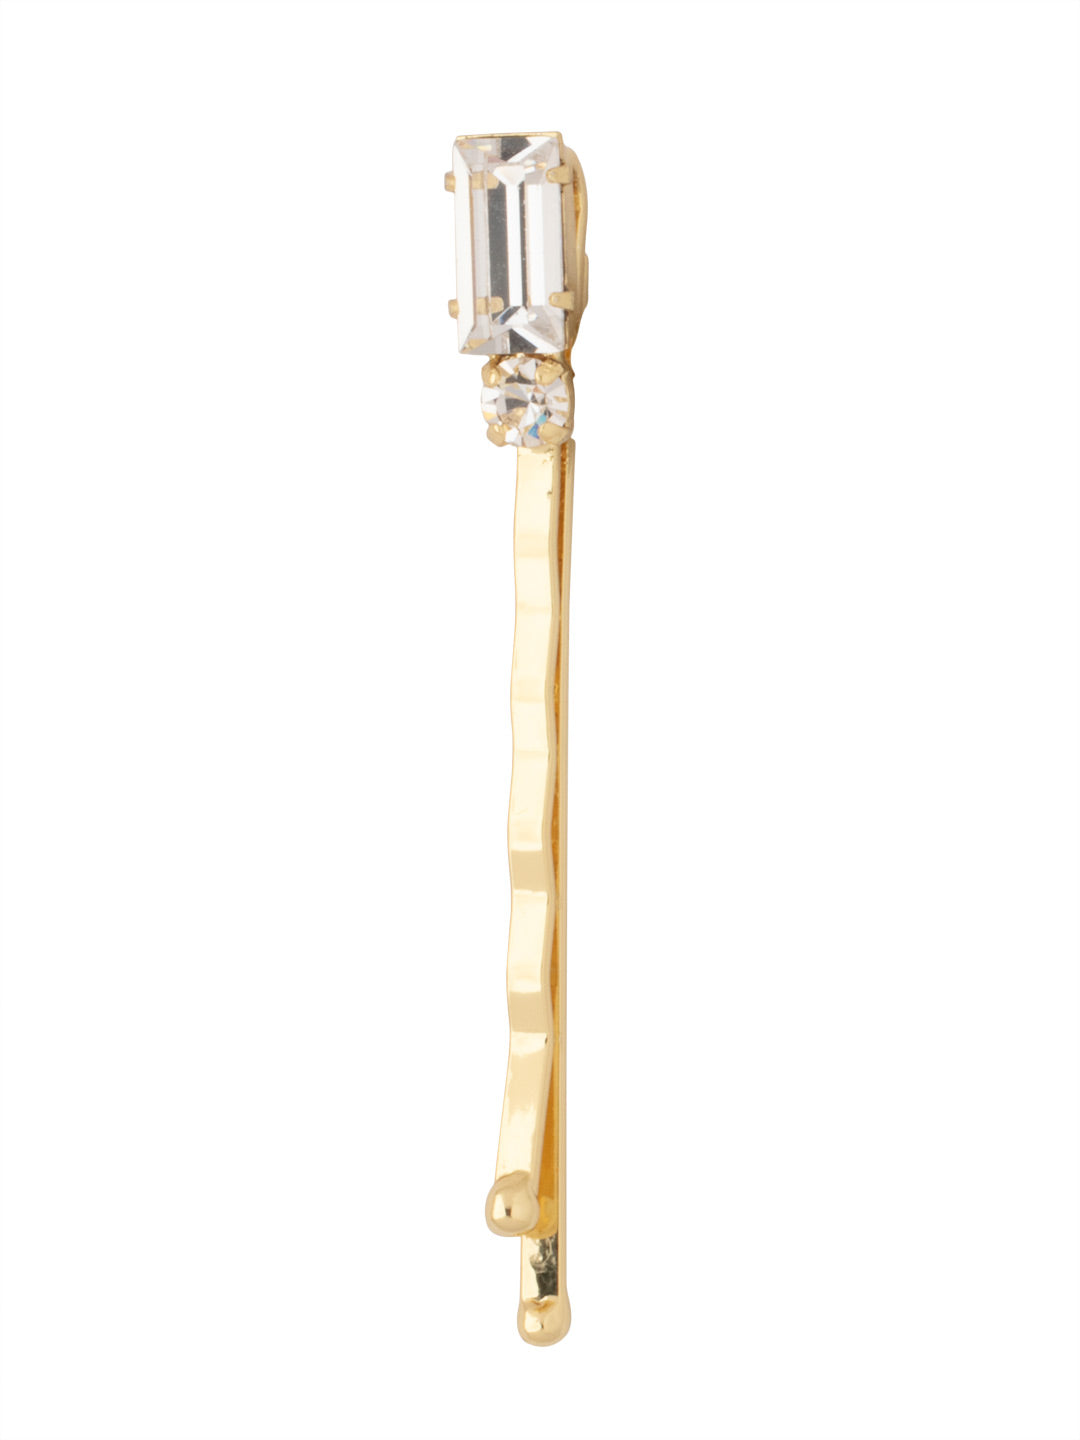 Eve Hair Pin - HFL6BGCRY - <p>The Eve Hair Pin features a navette and round cut crystals on a sturdy bobby pin. From Sorrelli's Crystal collection in our Bright Gold-tone finish.</p>